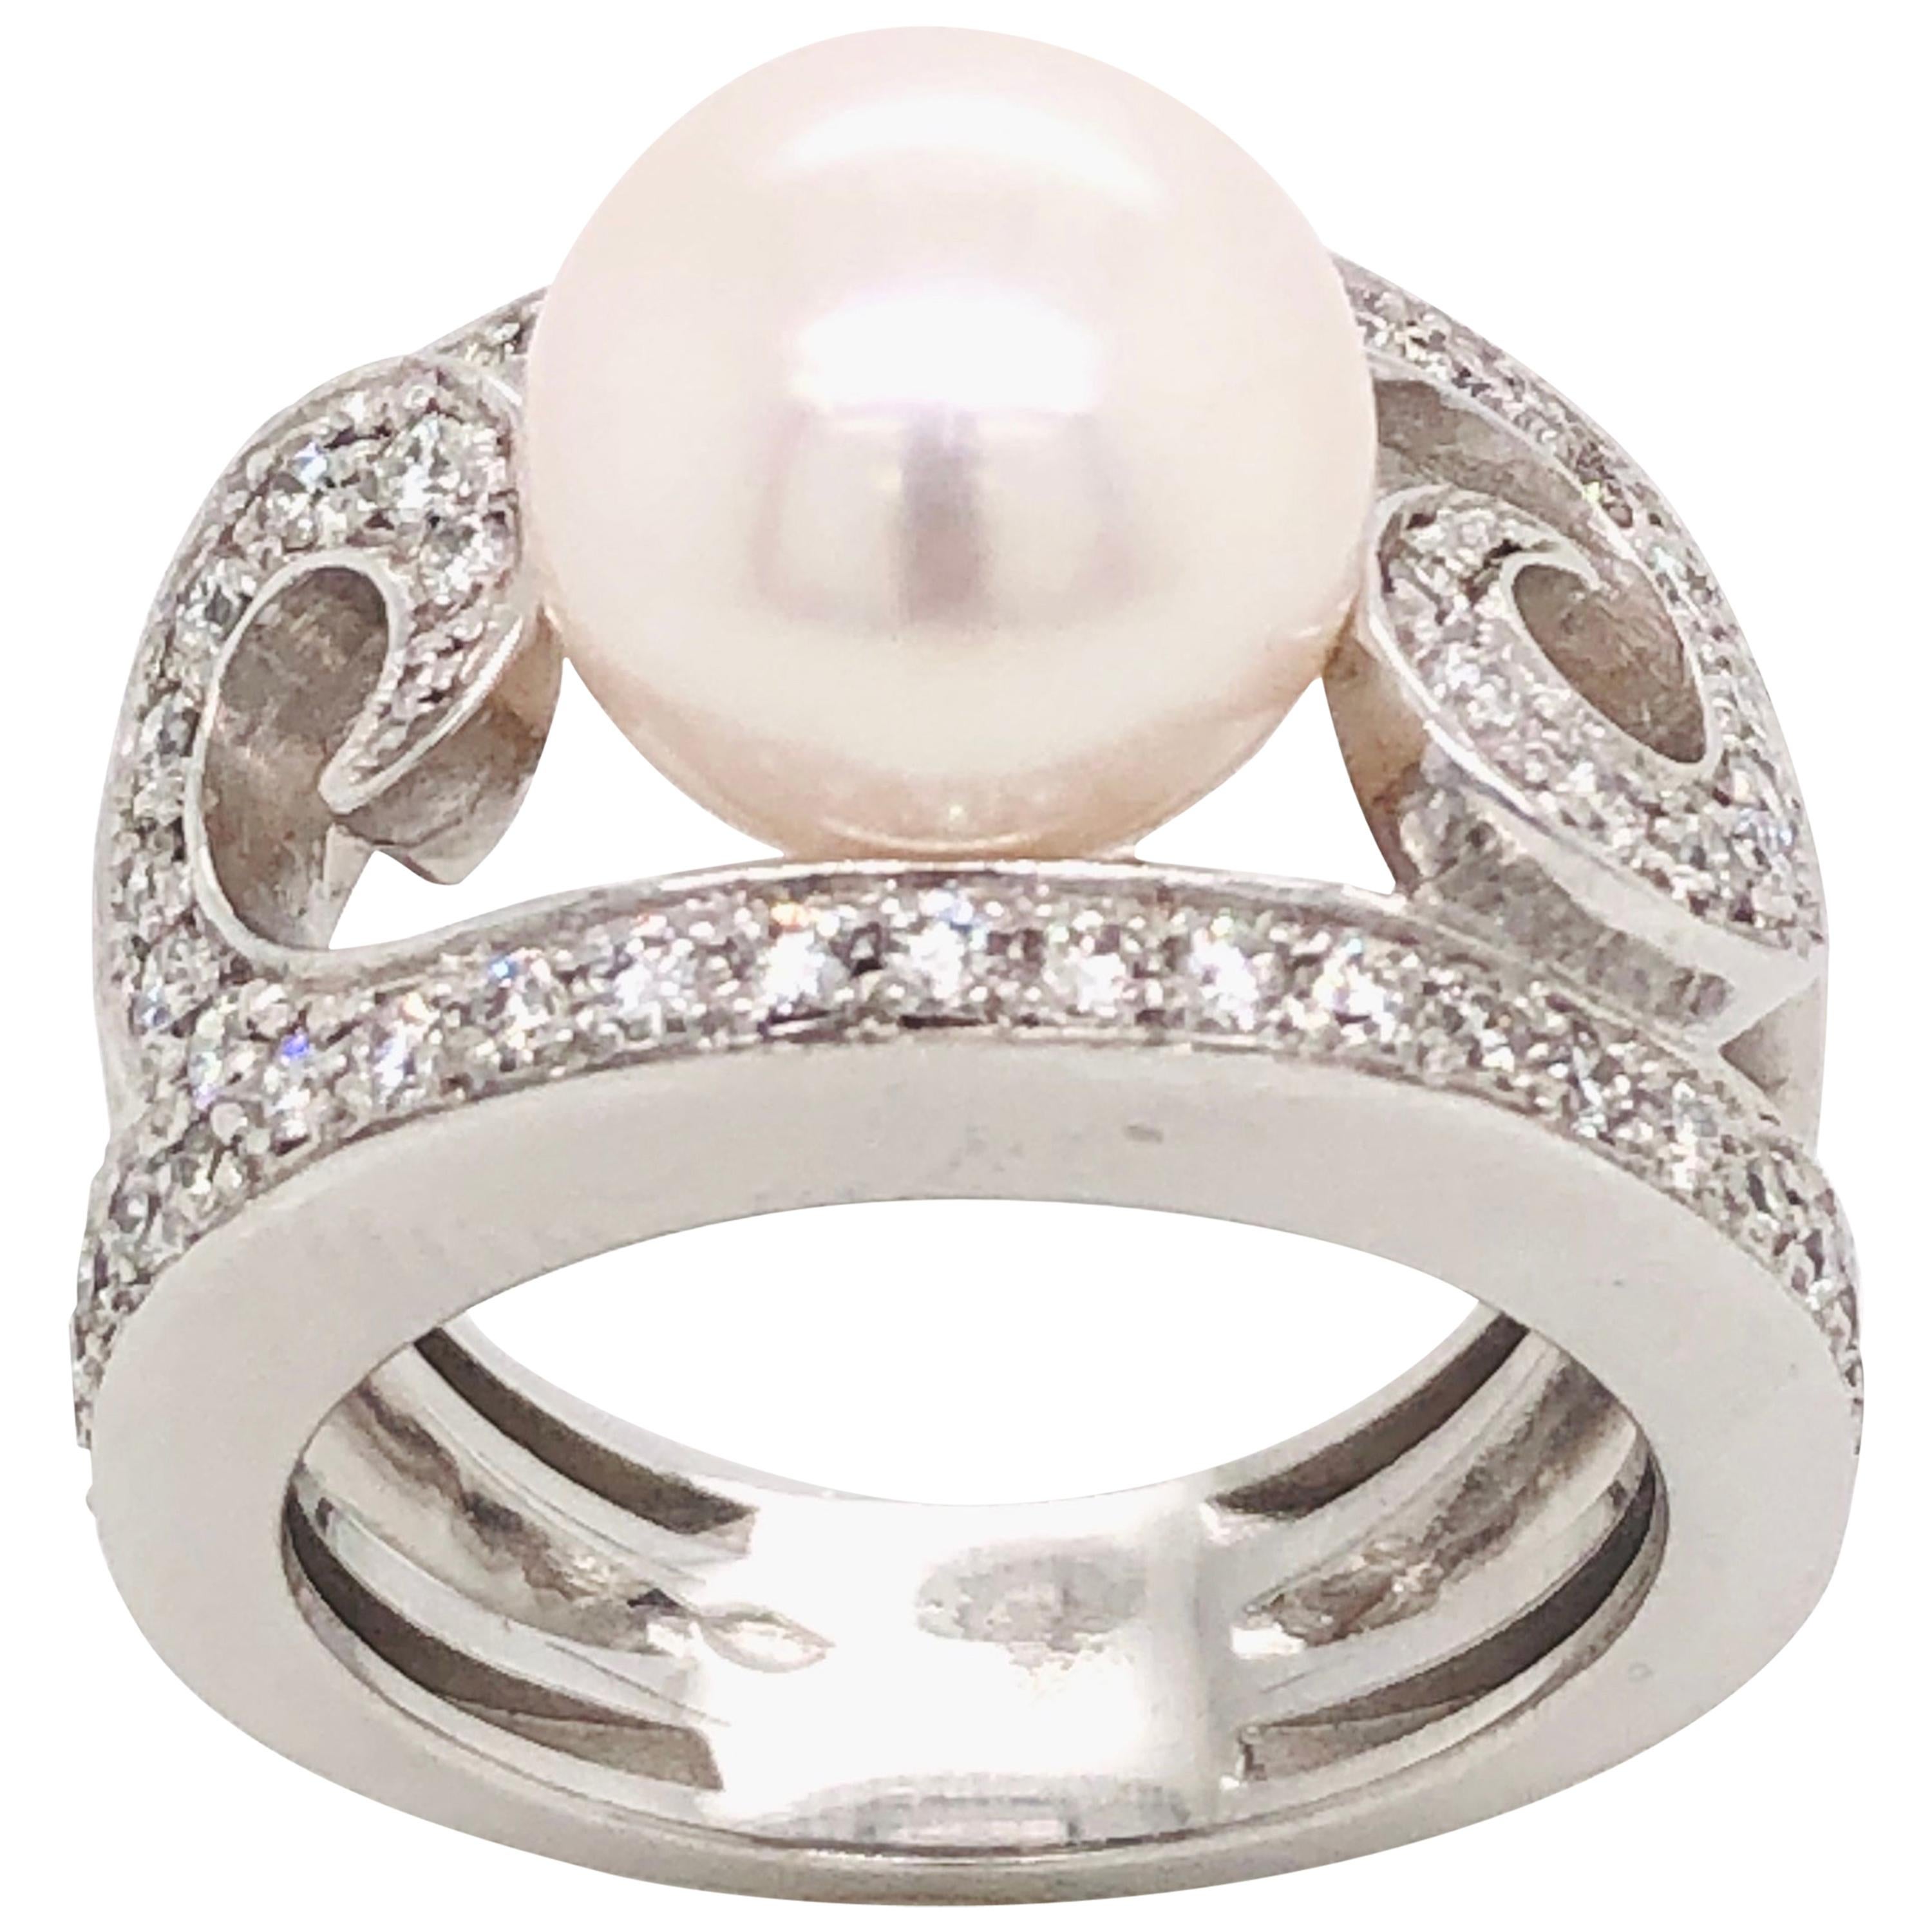 Cultured Pearl and Diamonds on White Gold 18 Karat Ring